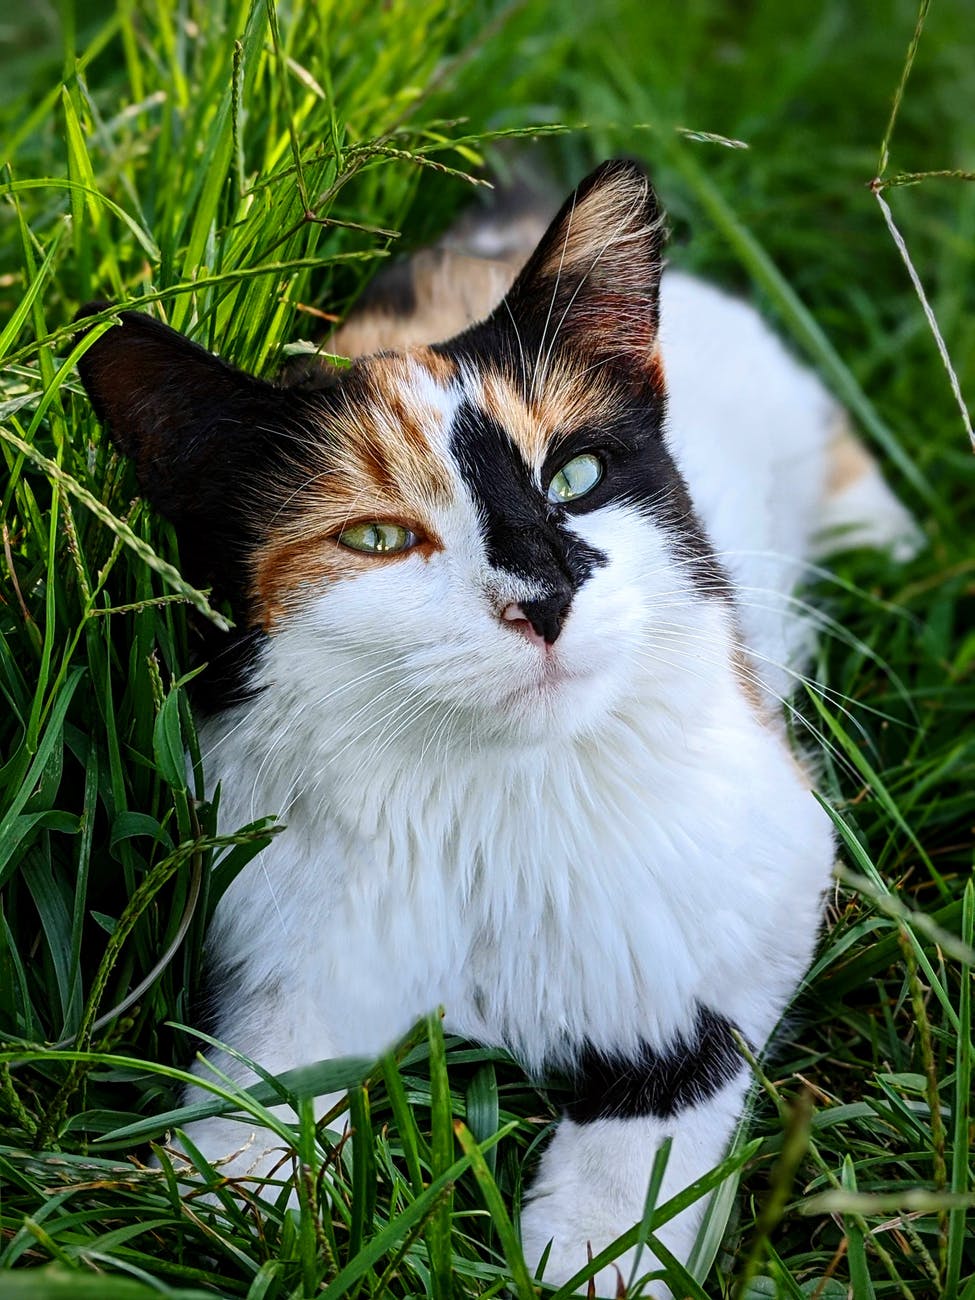 Are there any other hypoallergenic cat breeds besides calicos?